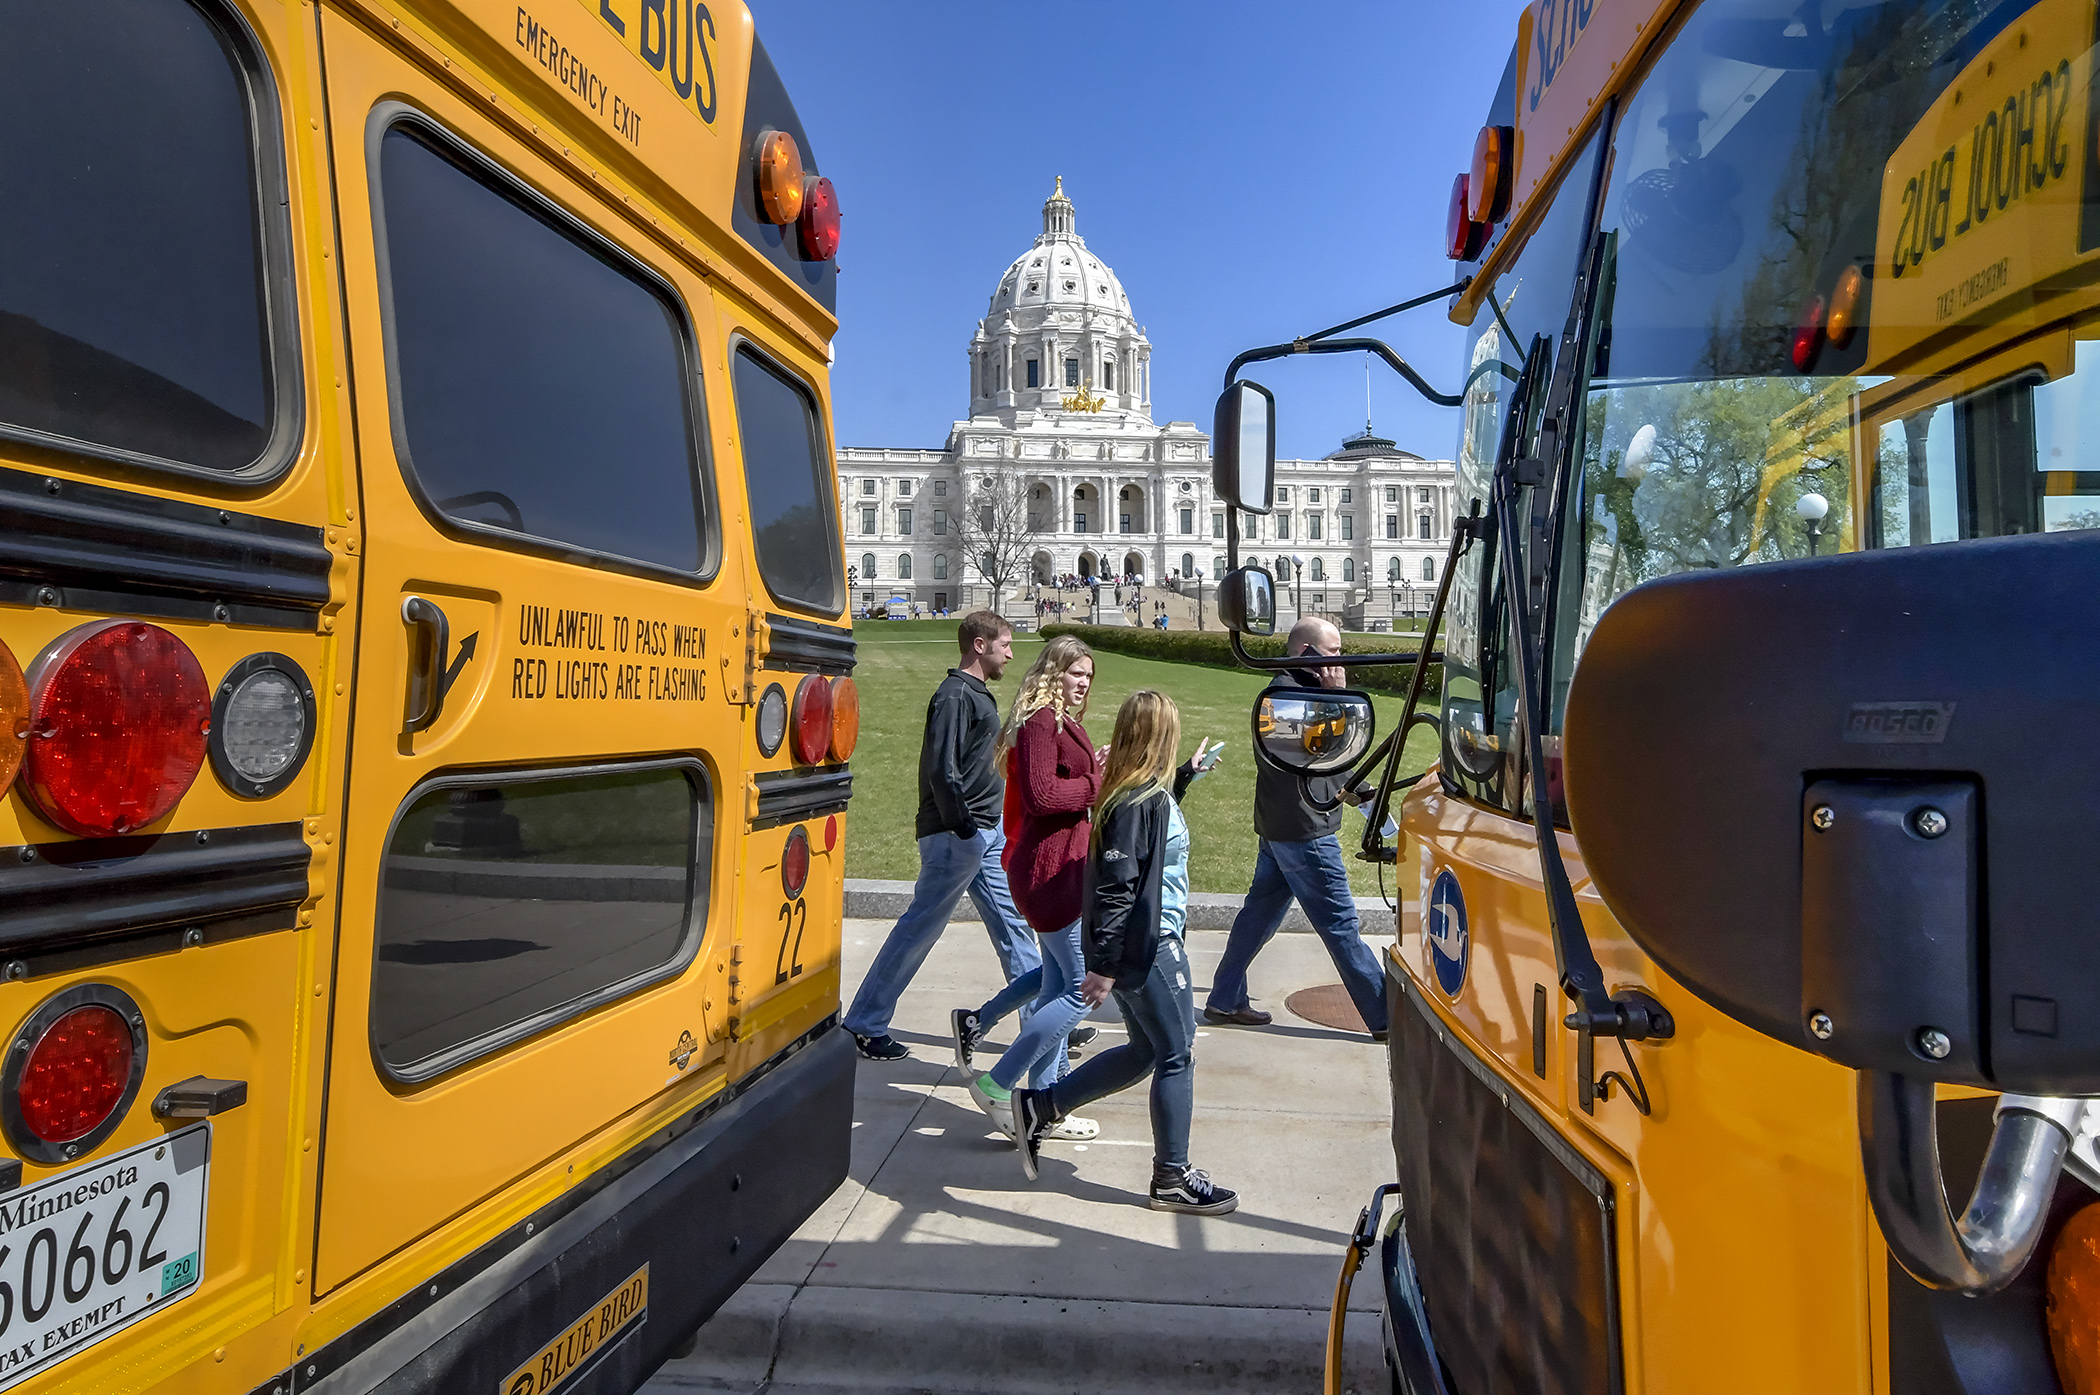 The month of May brings students from all over Minnesota to the State Capitol for school tours. Photo by Andrew VonBank